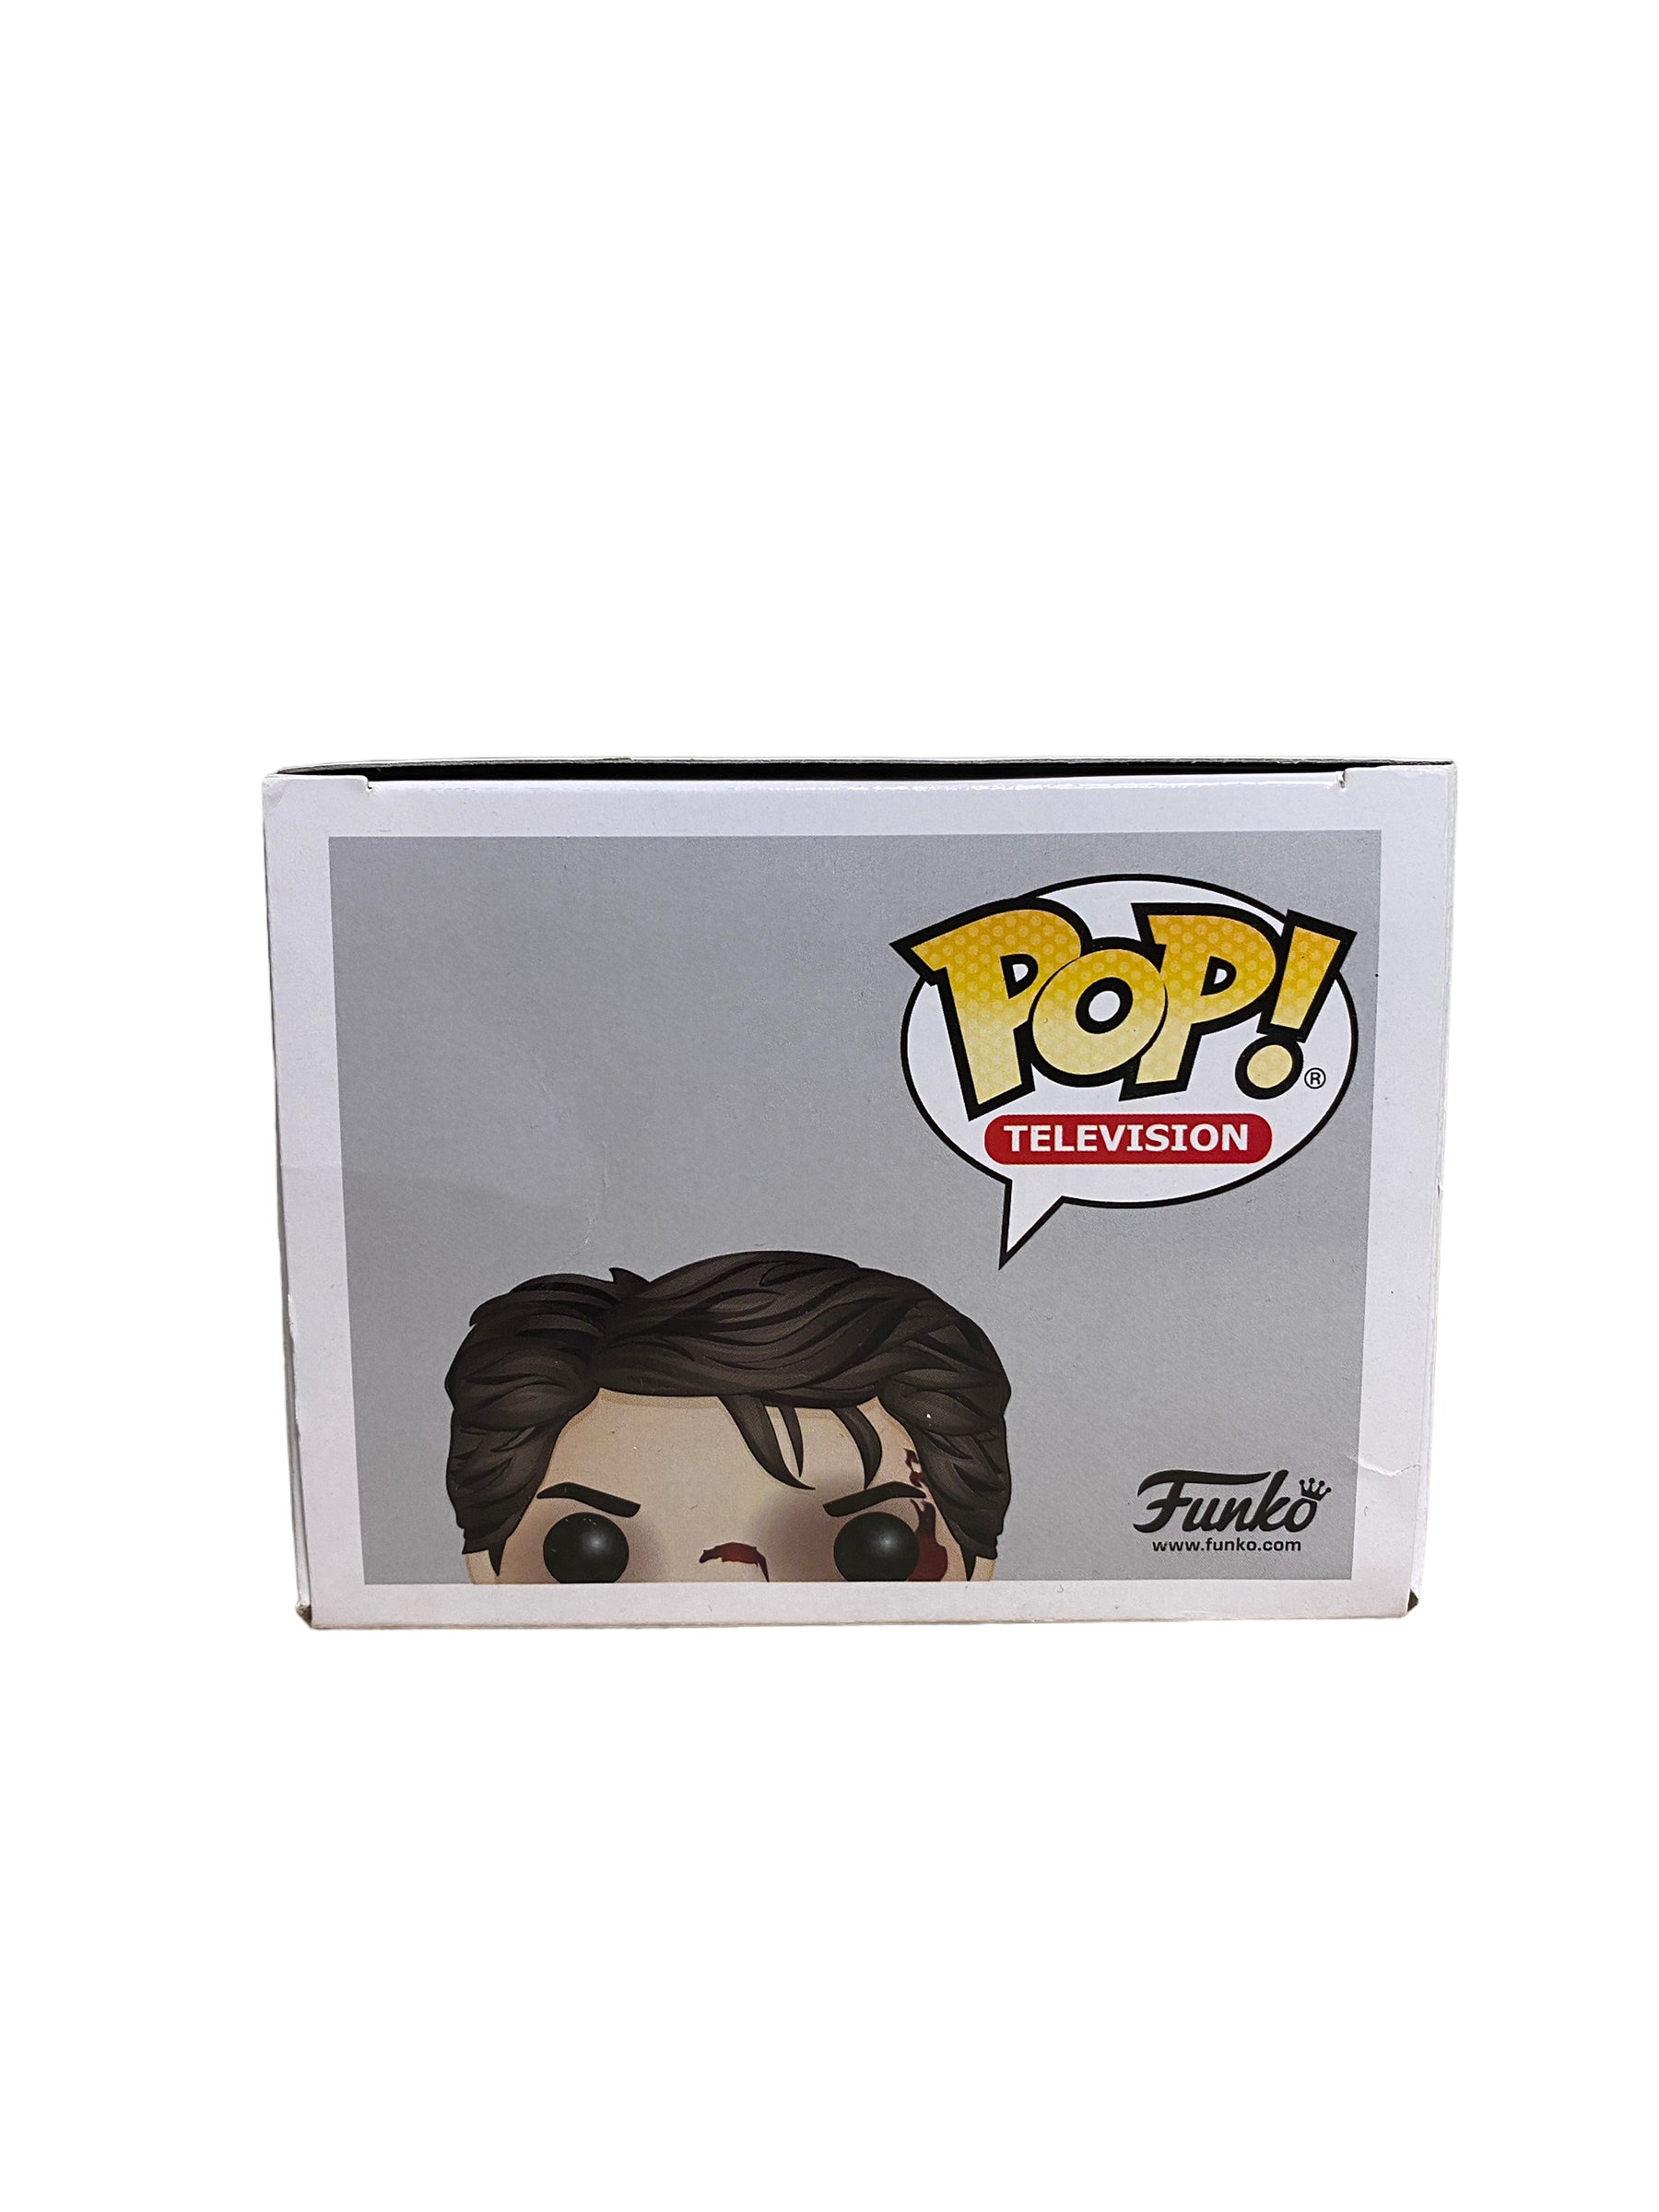 Steve #475 (w/ Bat) Funko Pop! - Stranger Things - SDCC 2017 Shared Exclusive - Condition 7/10